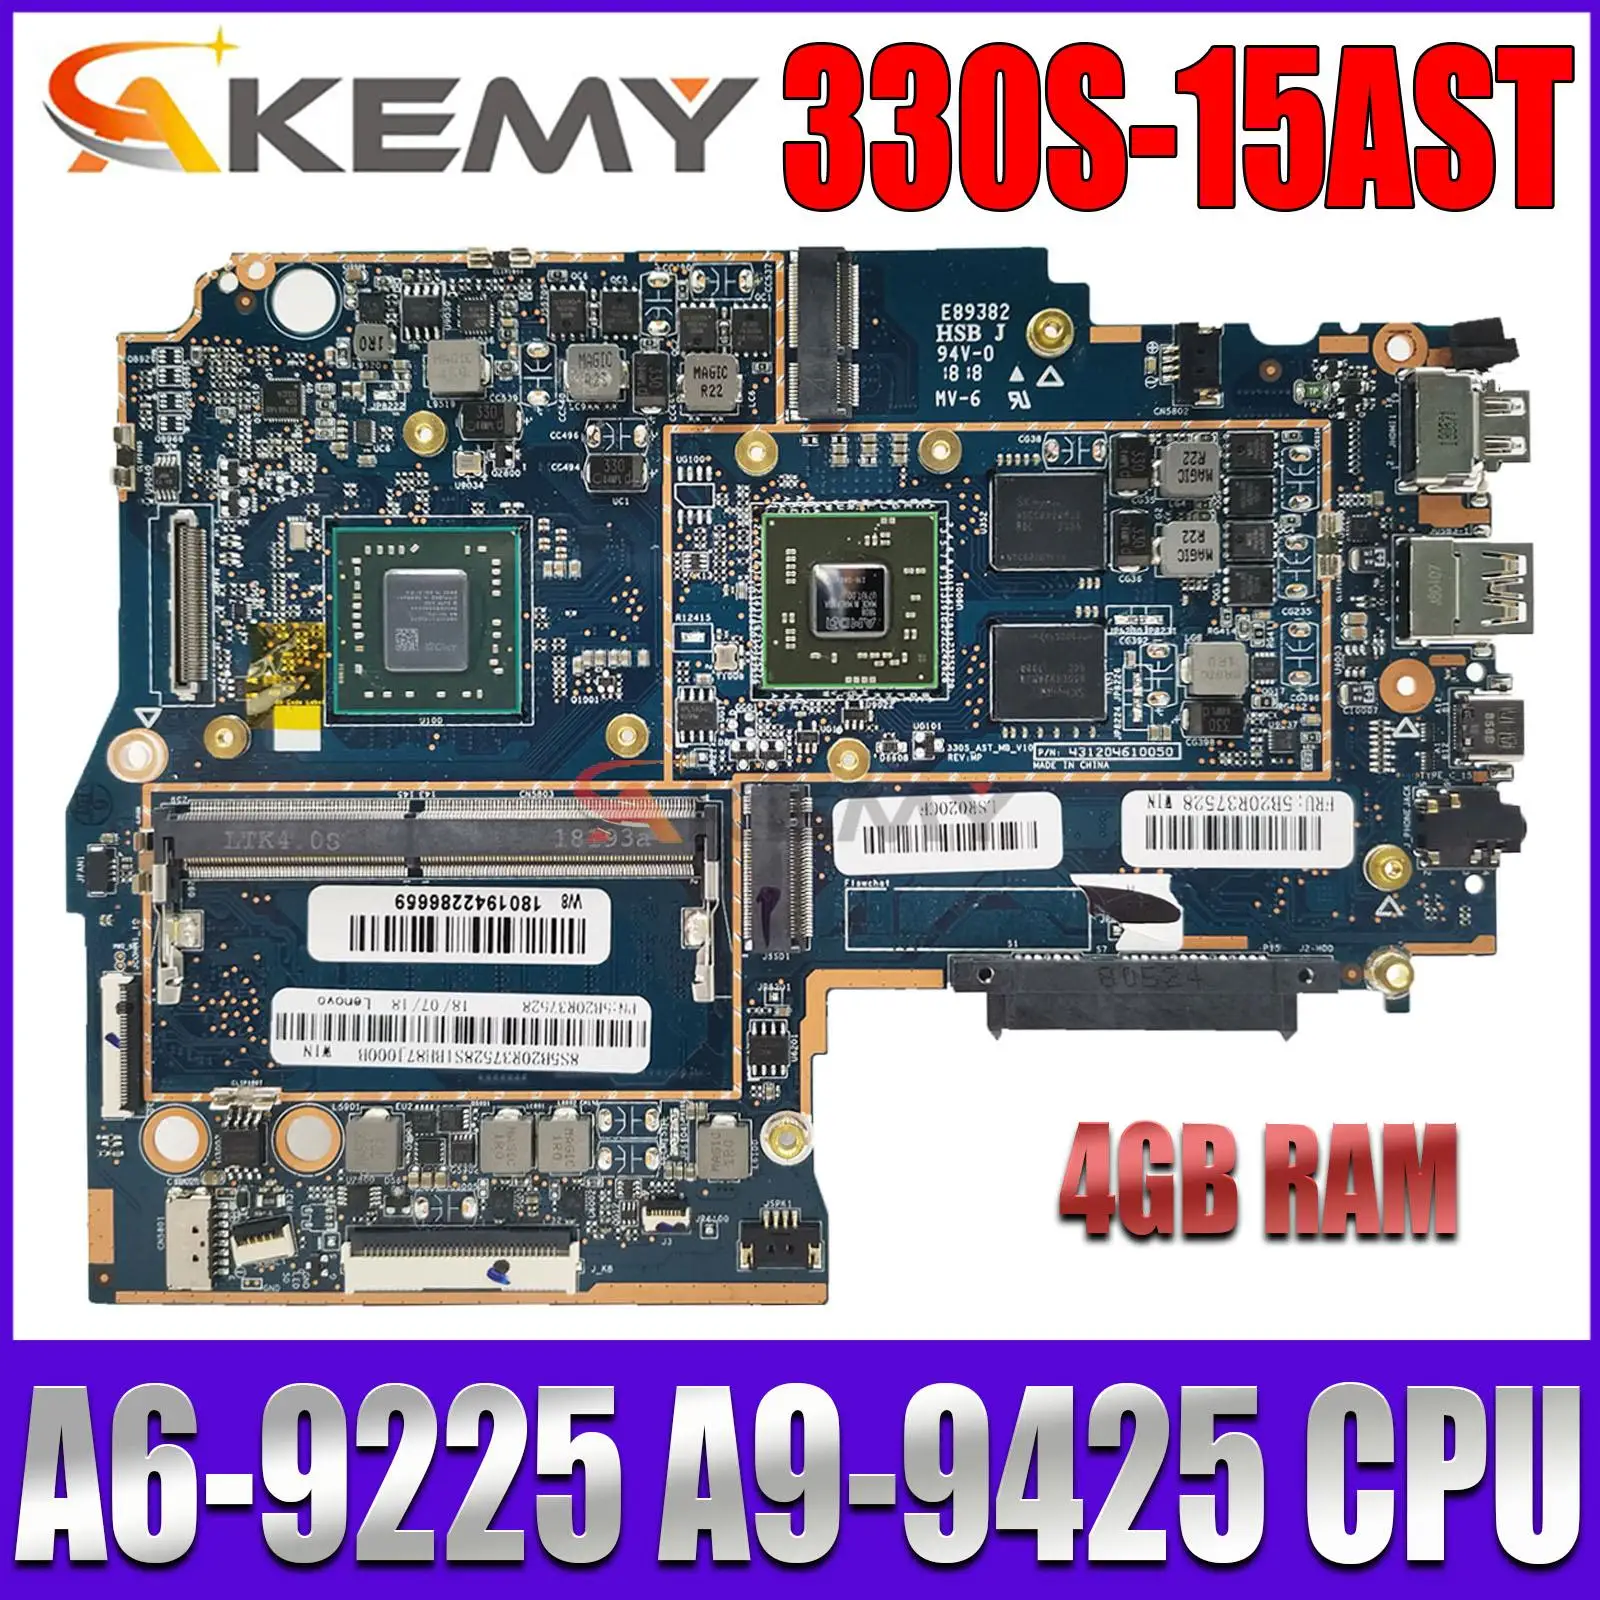 

For Lenovo 330S-15AST Laptop Motherboard with CPU A6-9225 A9-9425 CPU GPU R530 4GB RAM 100% Test Work